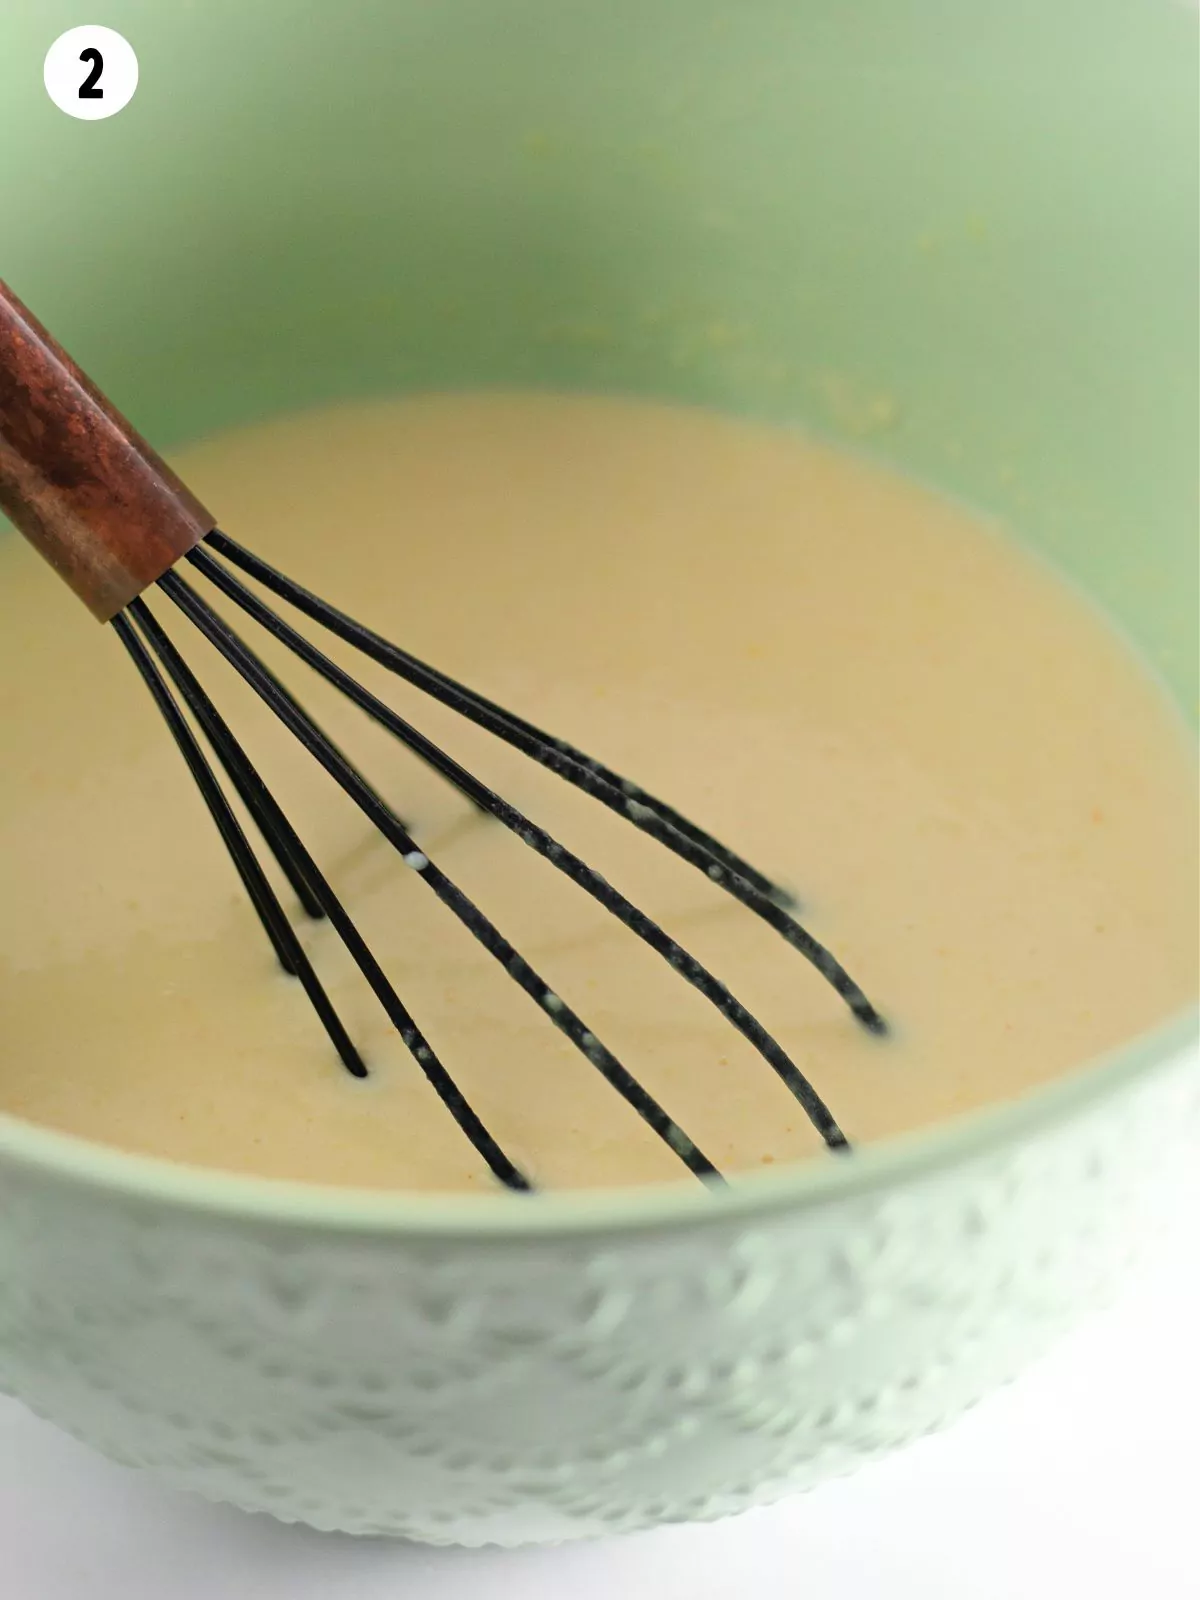 vanilla pudding in bowl with wire whisk.